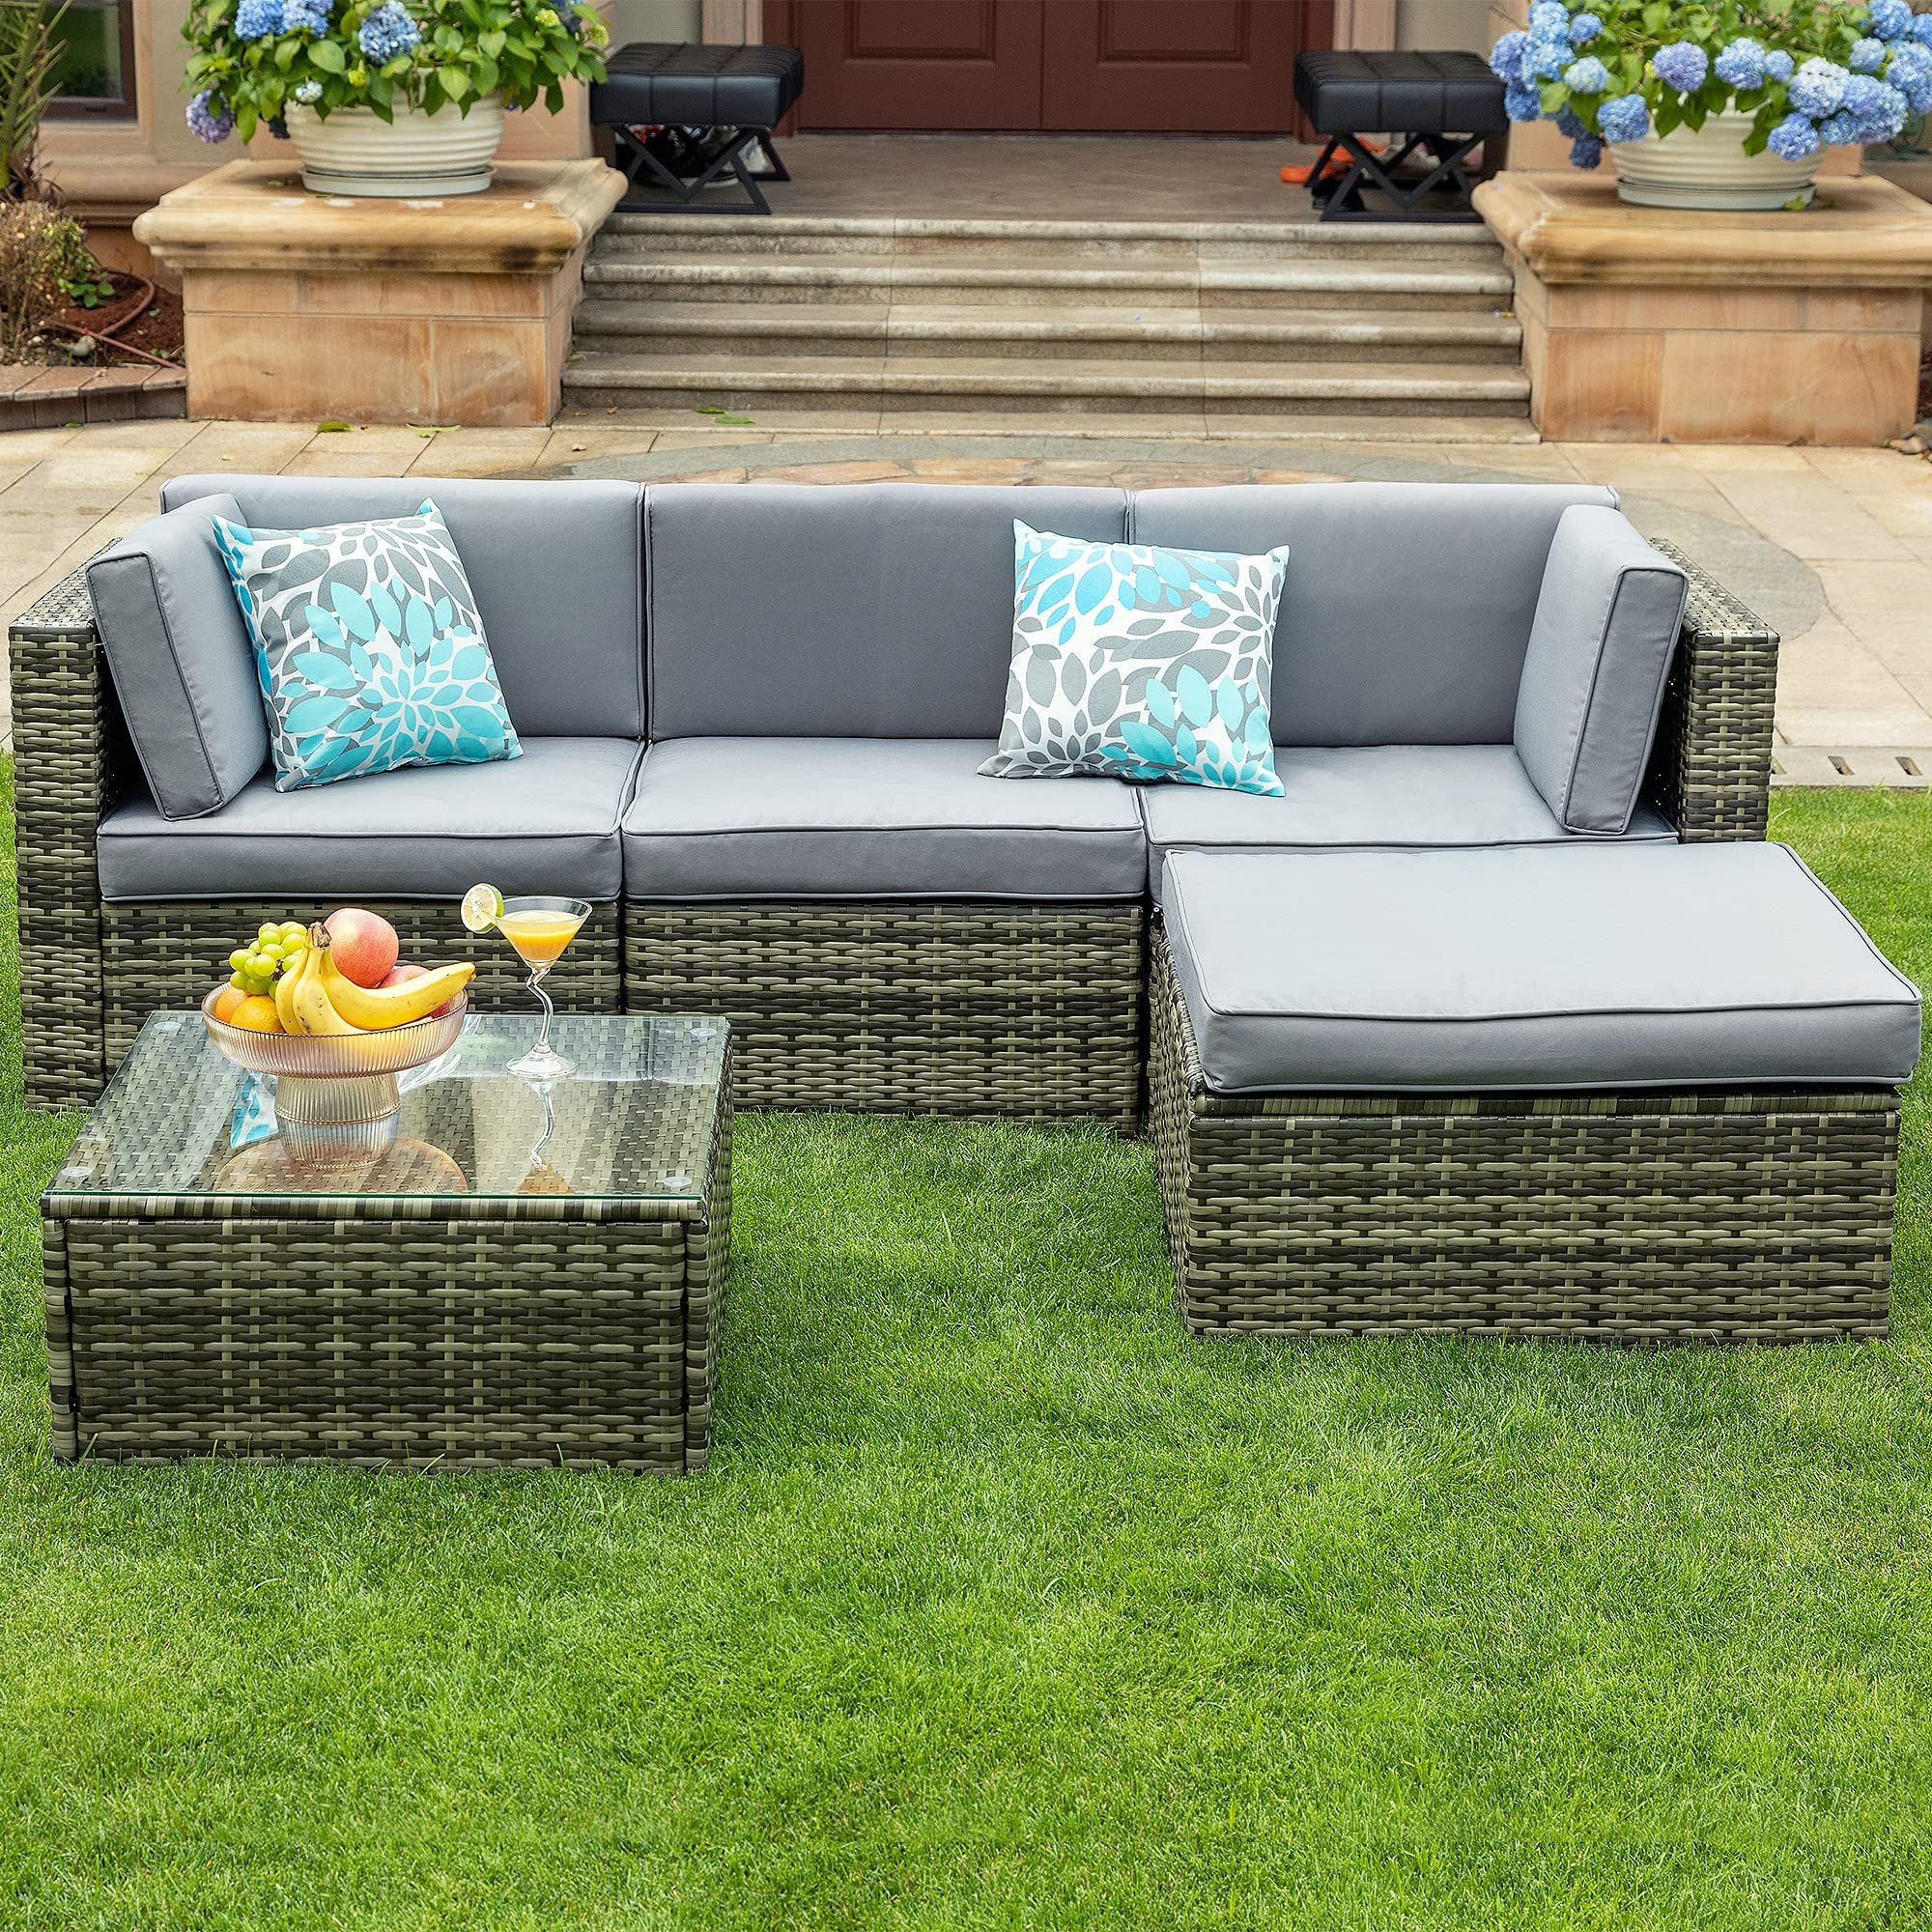 Amazon: Yitahome 5 Piece Outdoor Patio Furniture Sets, All Weather  Wicker Sectional Sofa Patio Conversation Set With Ottoman, Coffee Table And  Cushions, Gray Gradient : Patio, Lawn & Garden With Newest 5 Piece Patio Furniture Set (View 7 of 15)